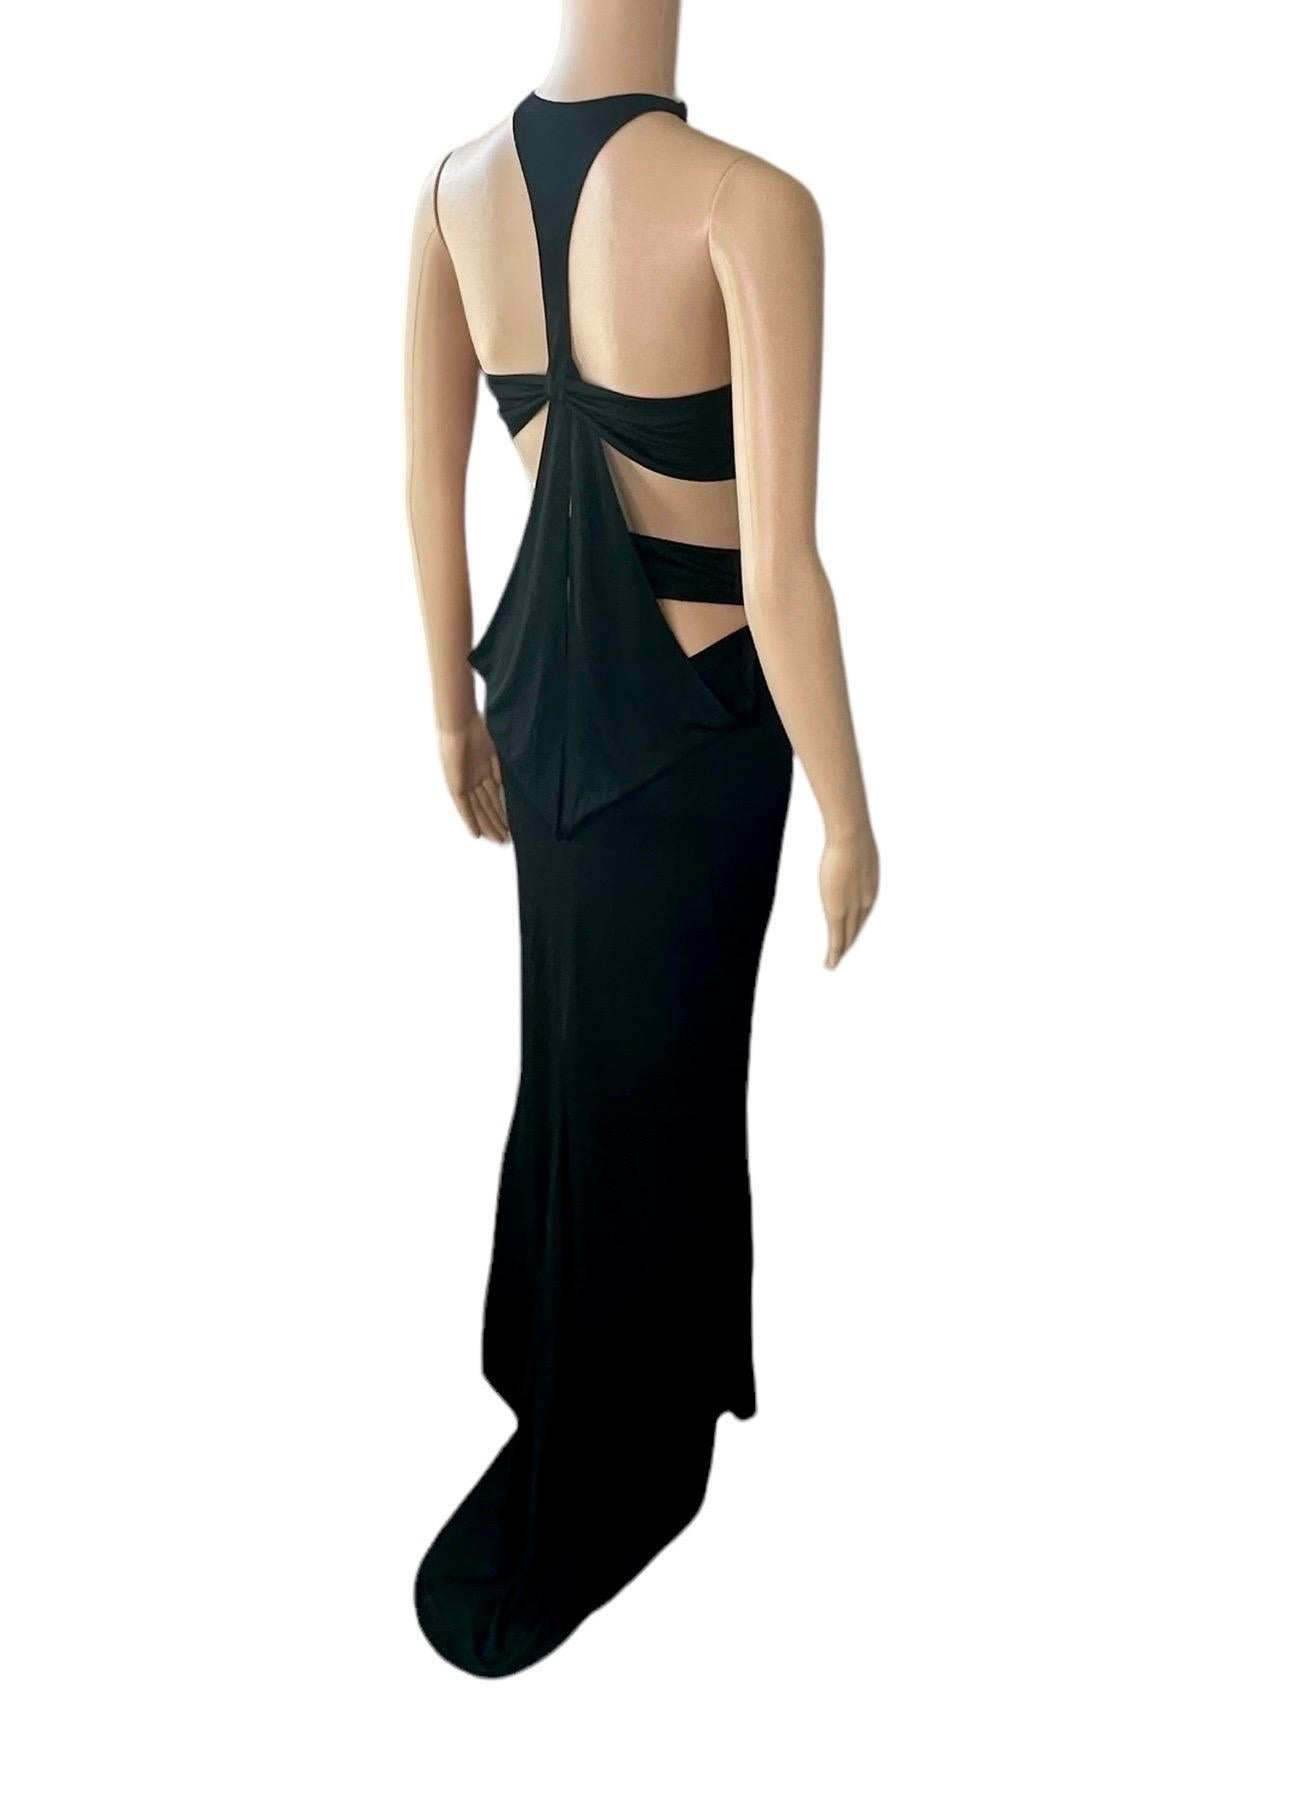 Tom Ford for Gucci F/W 2004 Embellished Plunging Cutout Black Evening Dress Gown 5